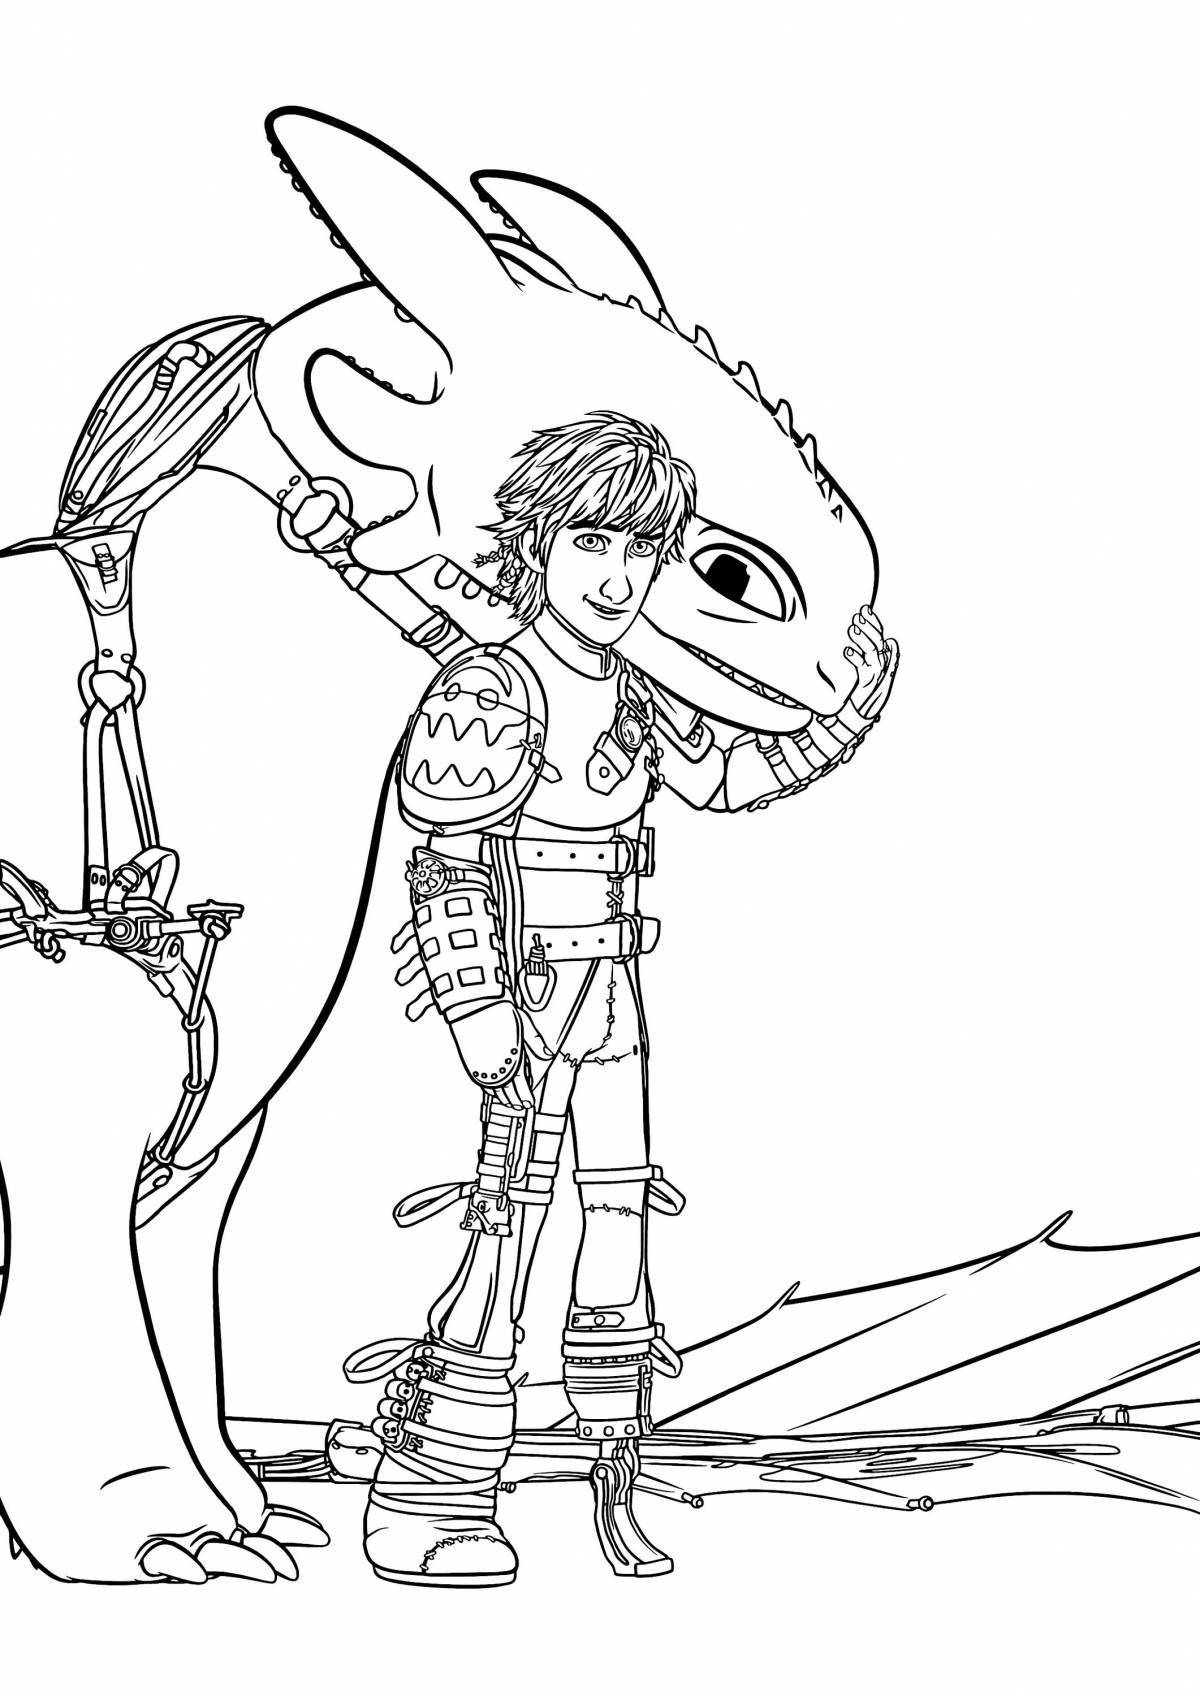 Charming how to train your dragon 2 coloring book